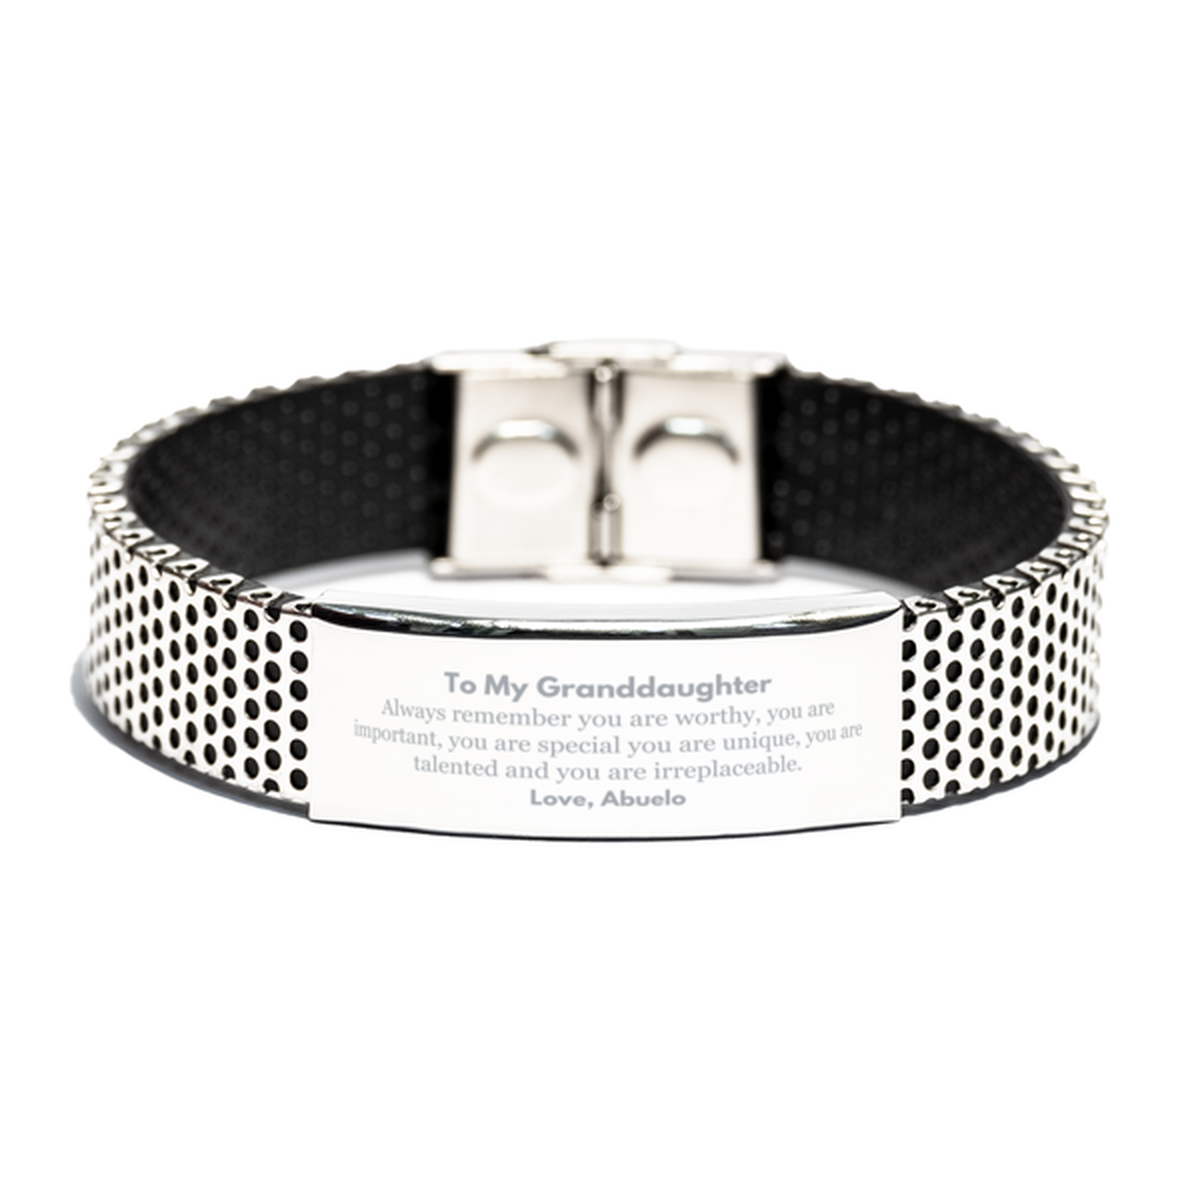 Granddaughter Birthday Gifts from Abuelo, Inspirational Stainless Steel Bracelet for Granddaughter Christmas Graduation Gifts for Granddaughter Always remember you are worthy, you are important. Love, Abuelo